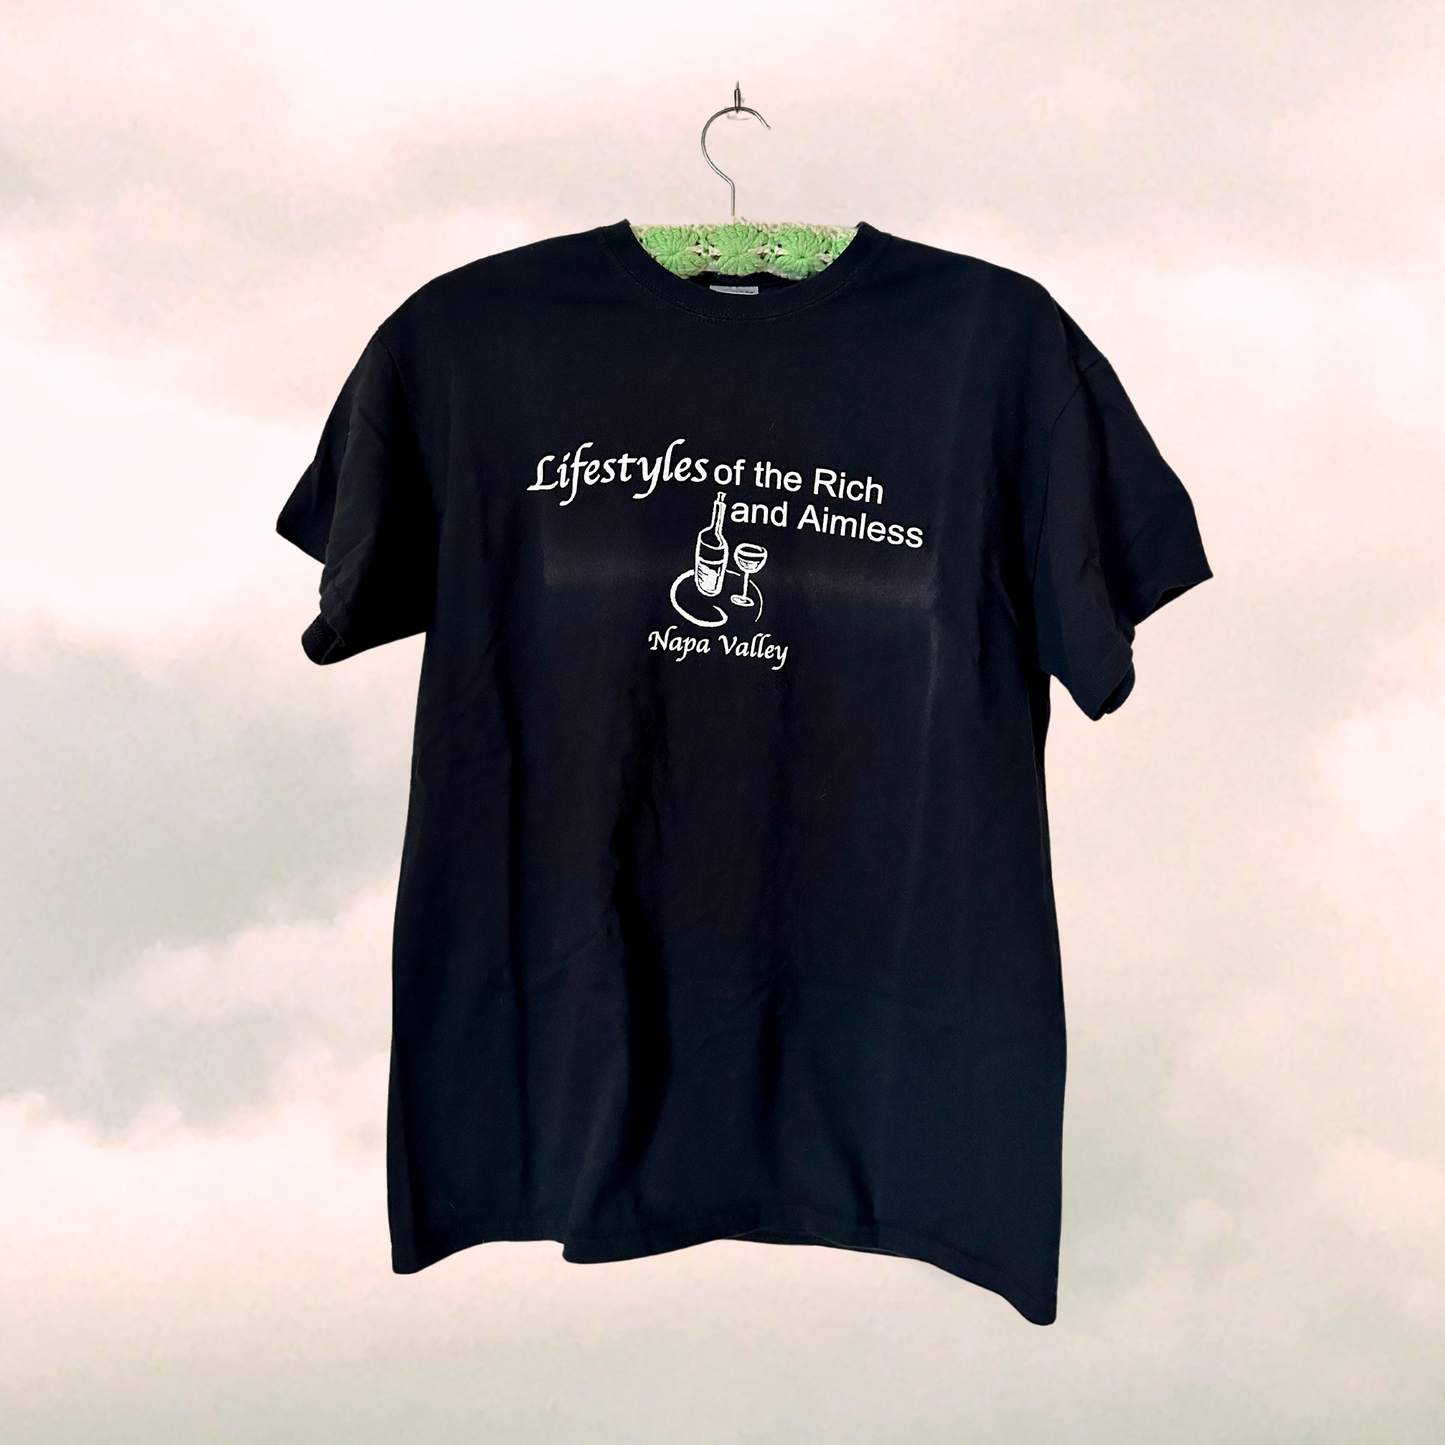 Lifestyles of the Rich and the Aimless Vintage T Shirt